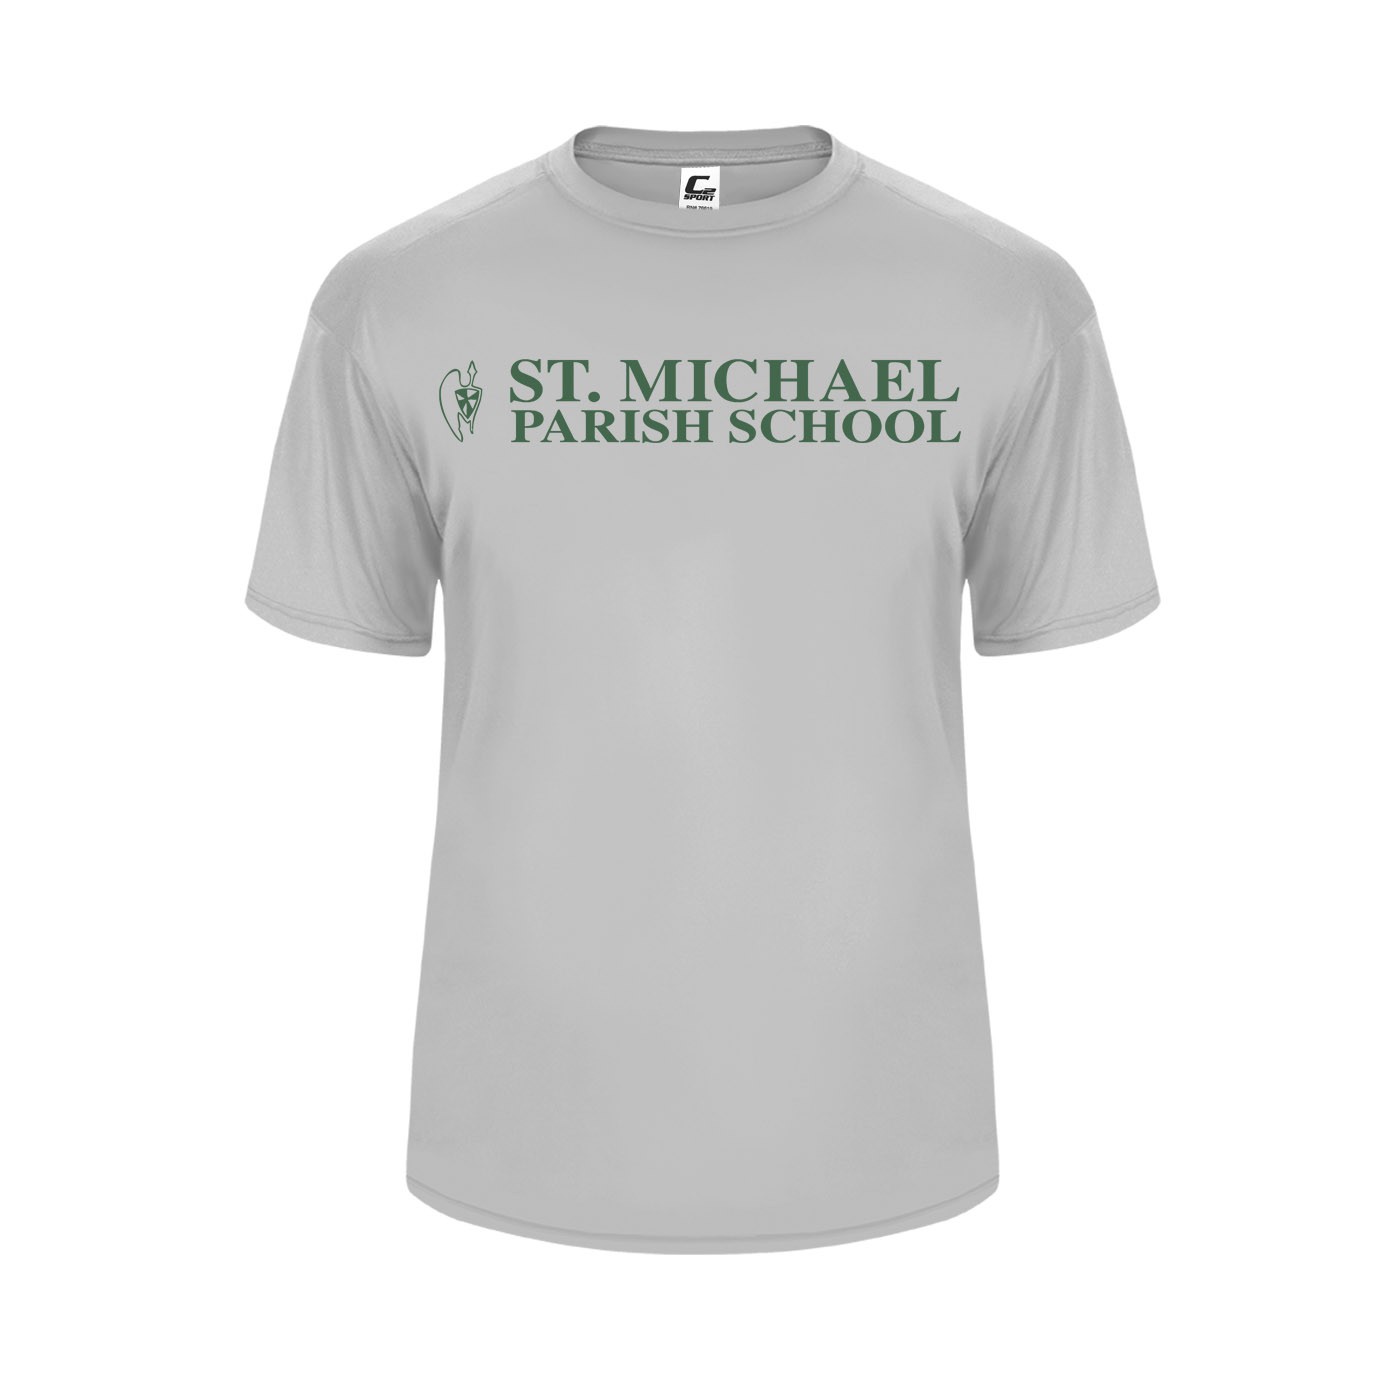 SMSU Spirit S/S Performance T-Shirt w/ Green Logo #4-5- Please Allow 3-4 Weeks for Delivery 